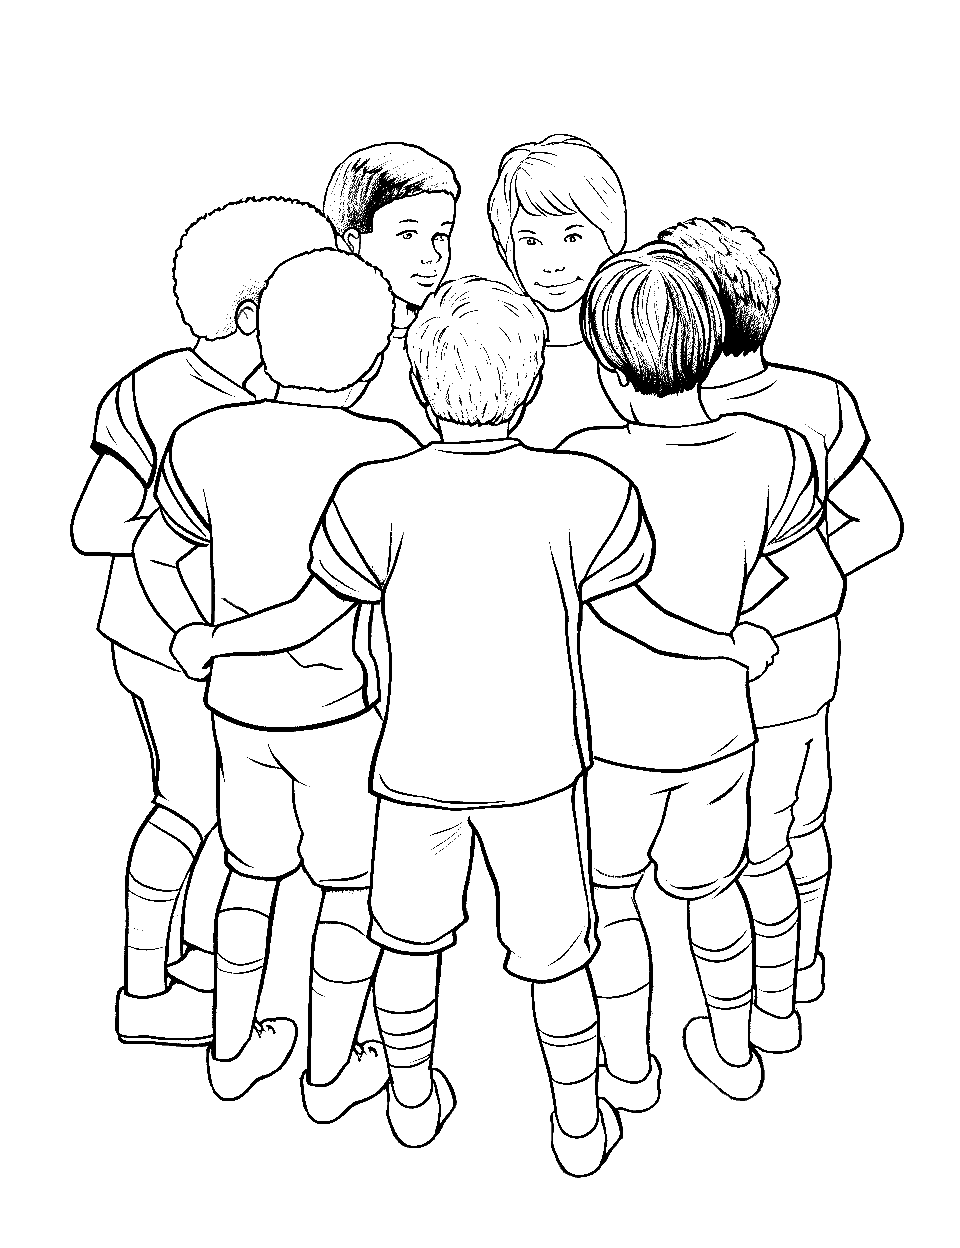 Spirited Team Huddle Coloring Page - A group of players in a huddle discussing the next play.